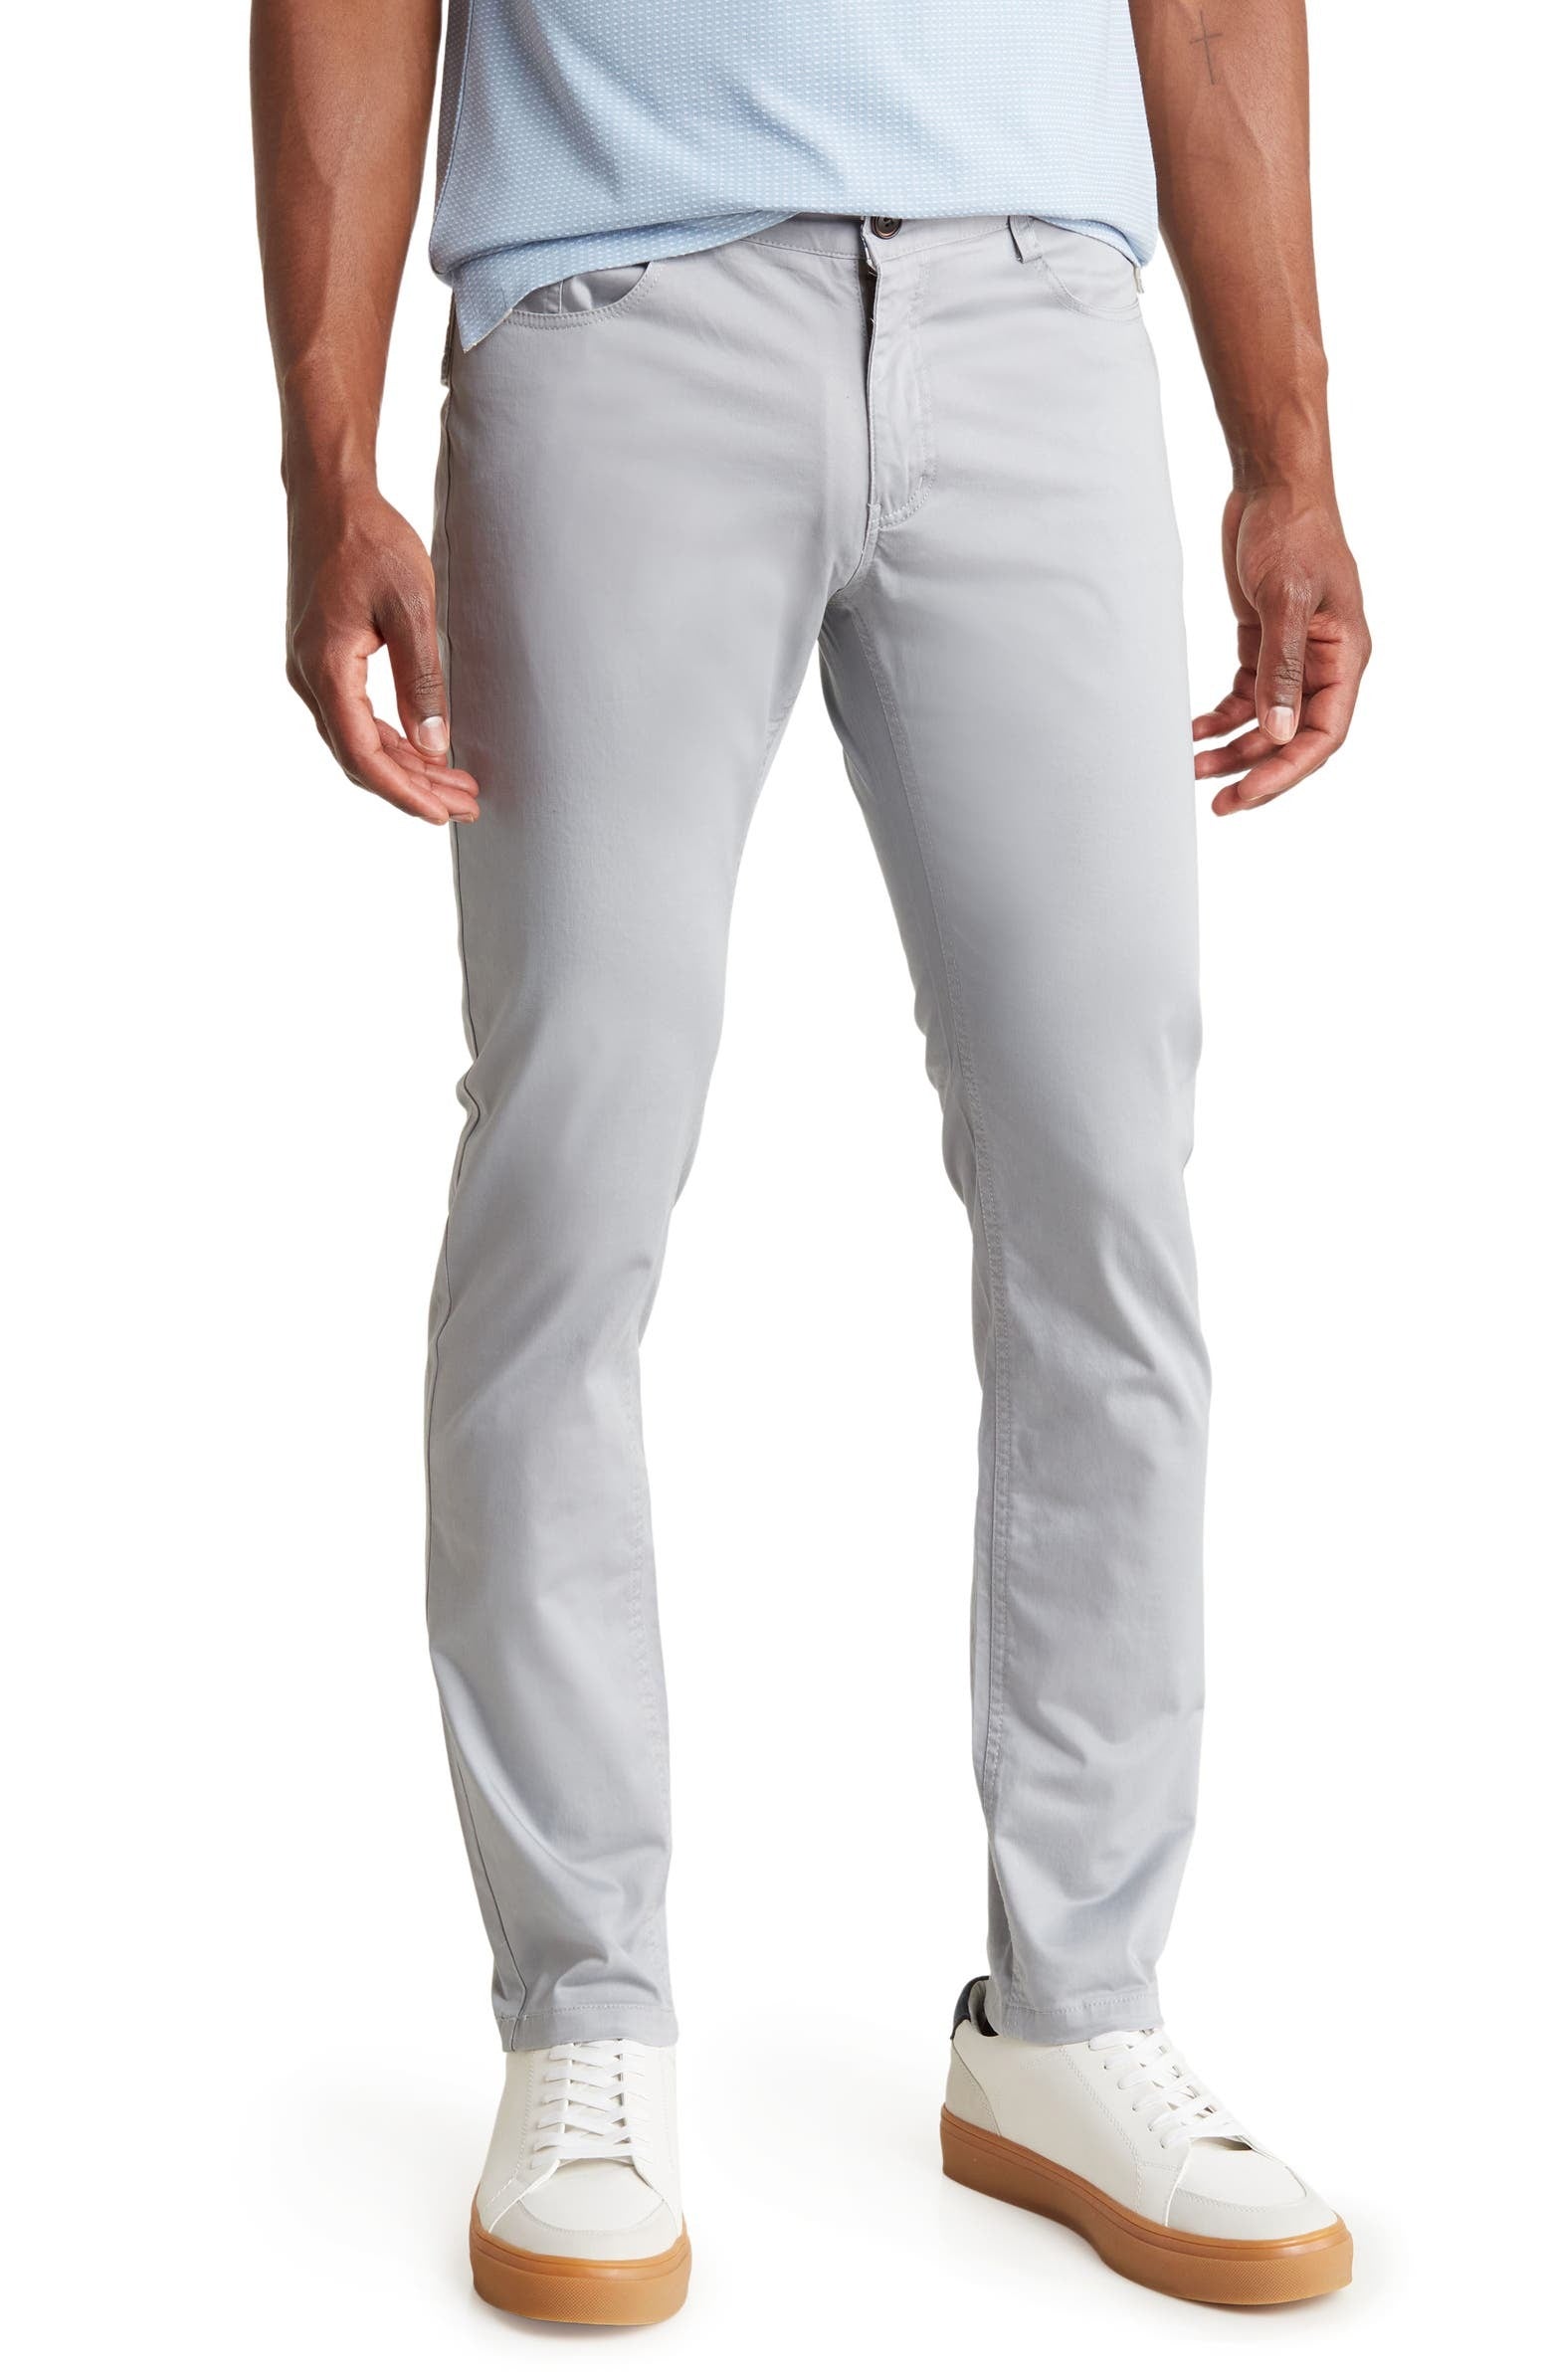 Buy JACK AND JONES White Cotton Slim Fit Mens Track Pants | Shoppers Stop